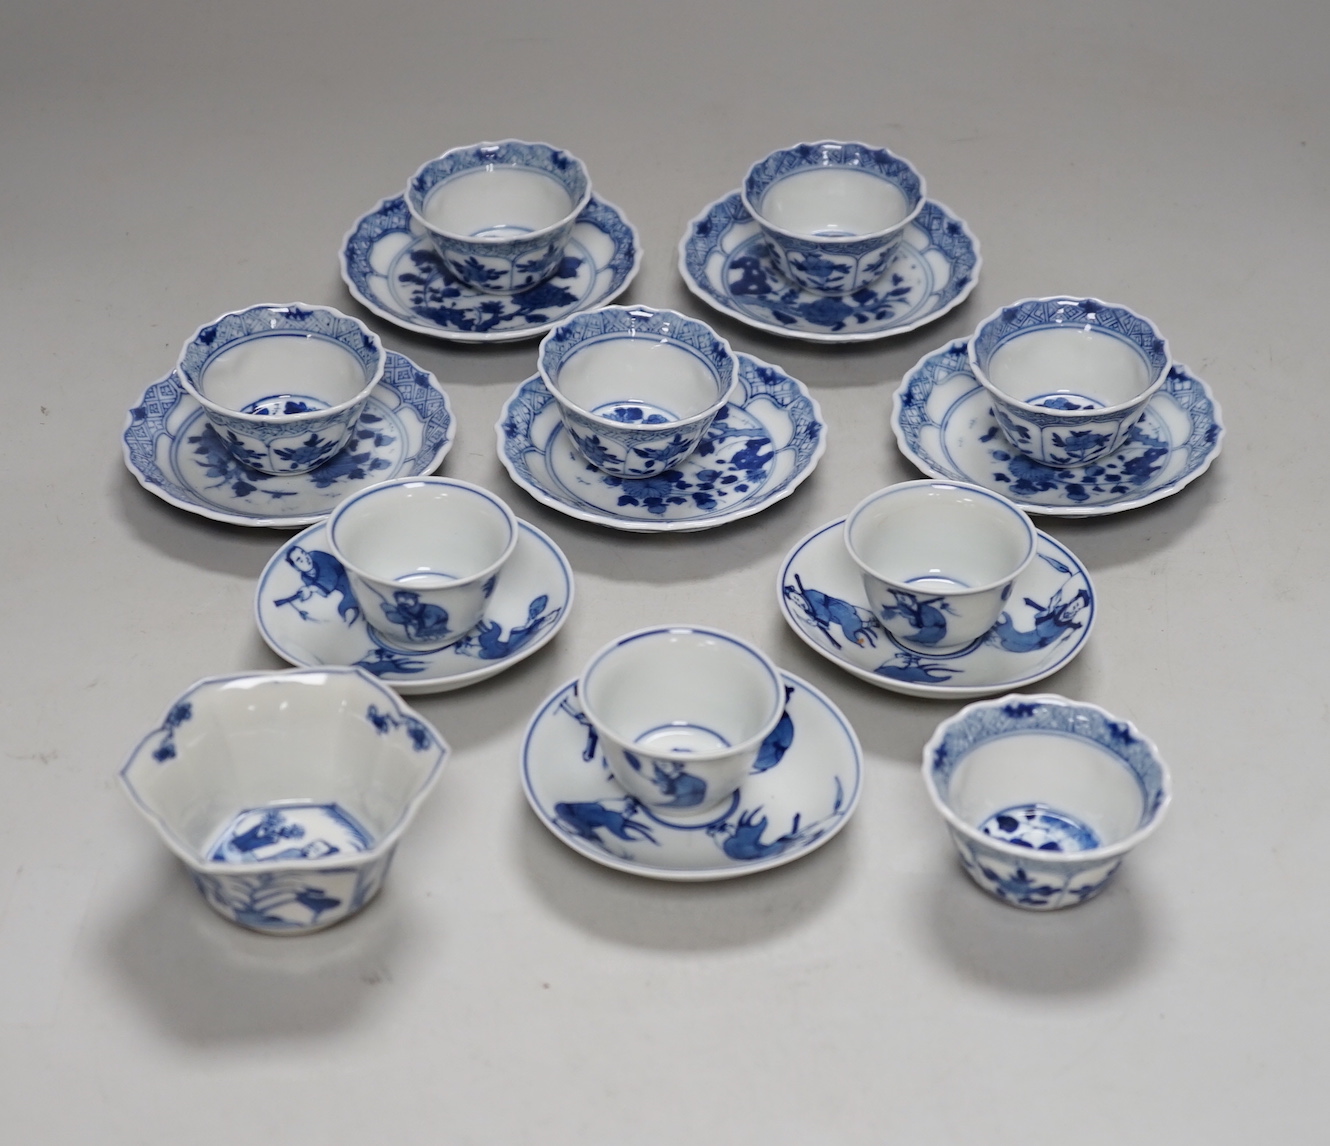 Two miniature Chinese blue and white porcelain part tea sets